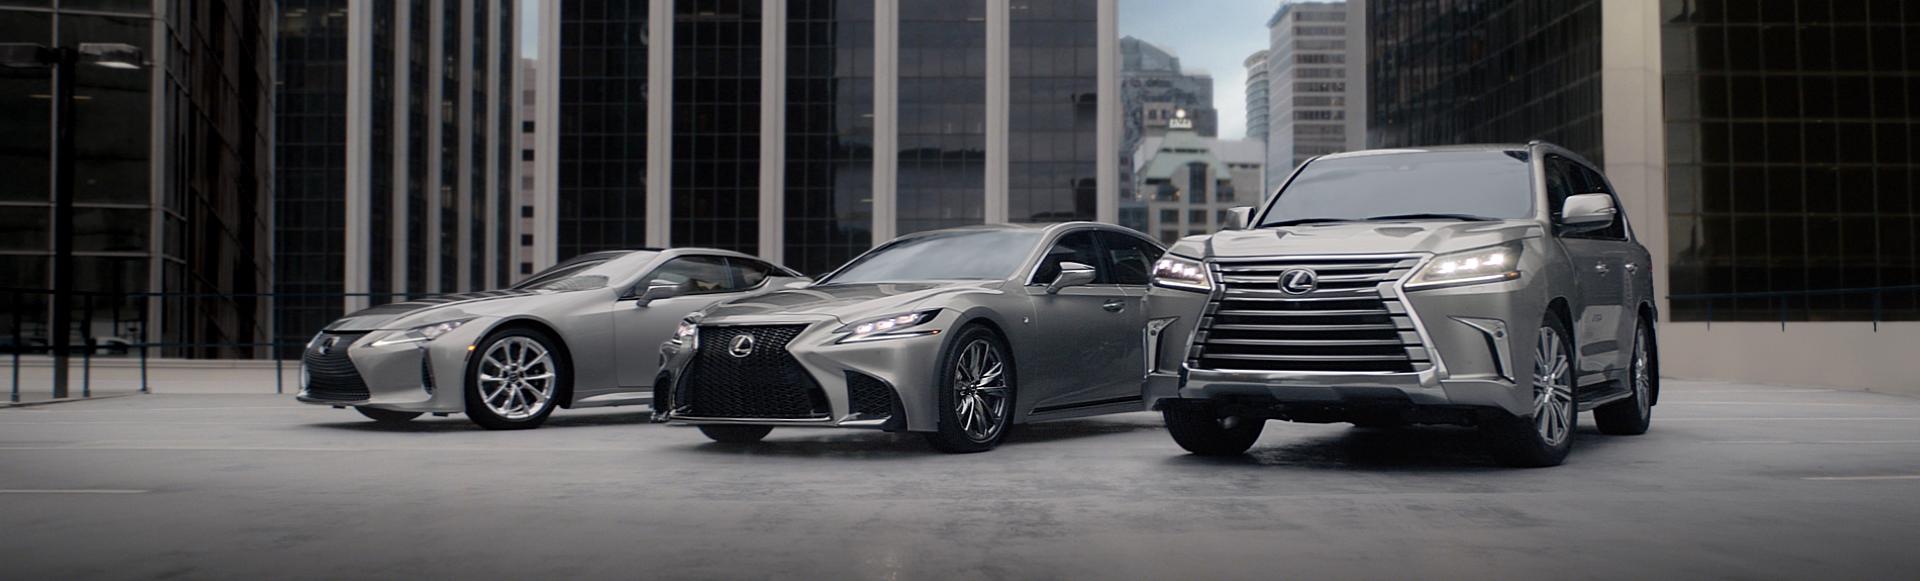 Celebrating 10 Million Vehicles Sold and a Best-Ever Year, the Lexus Brand Continues to Grow Globally